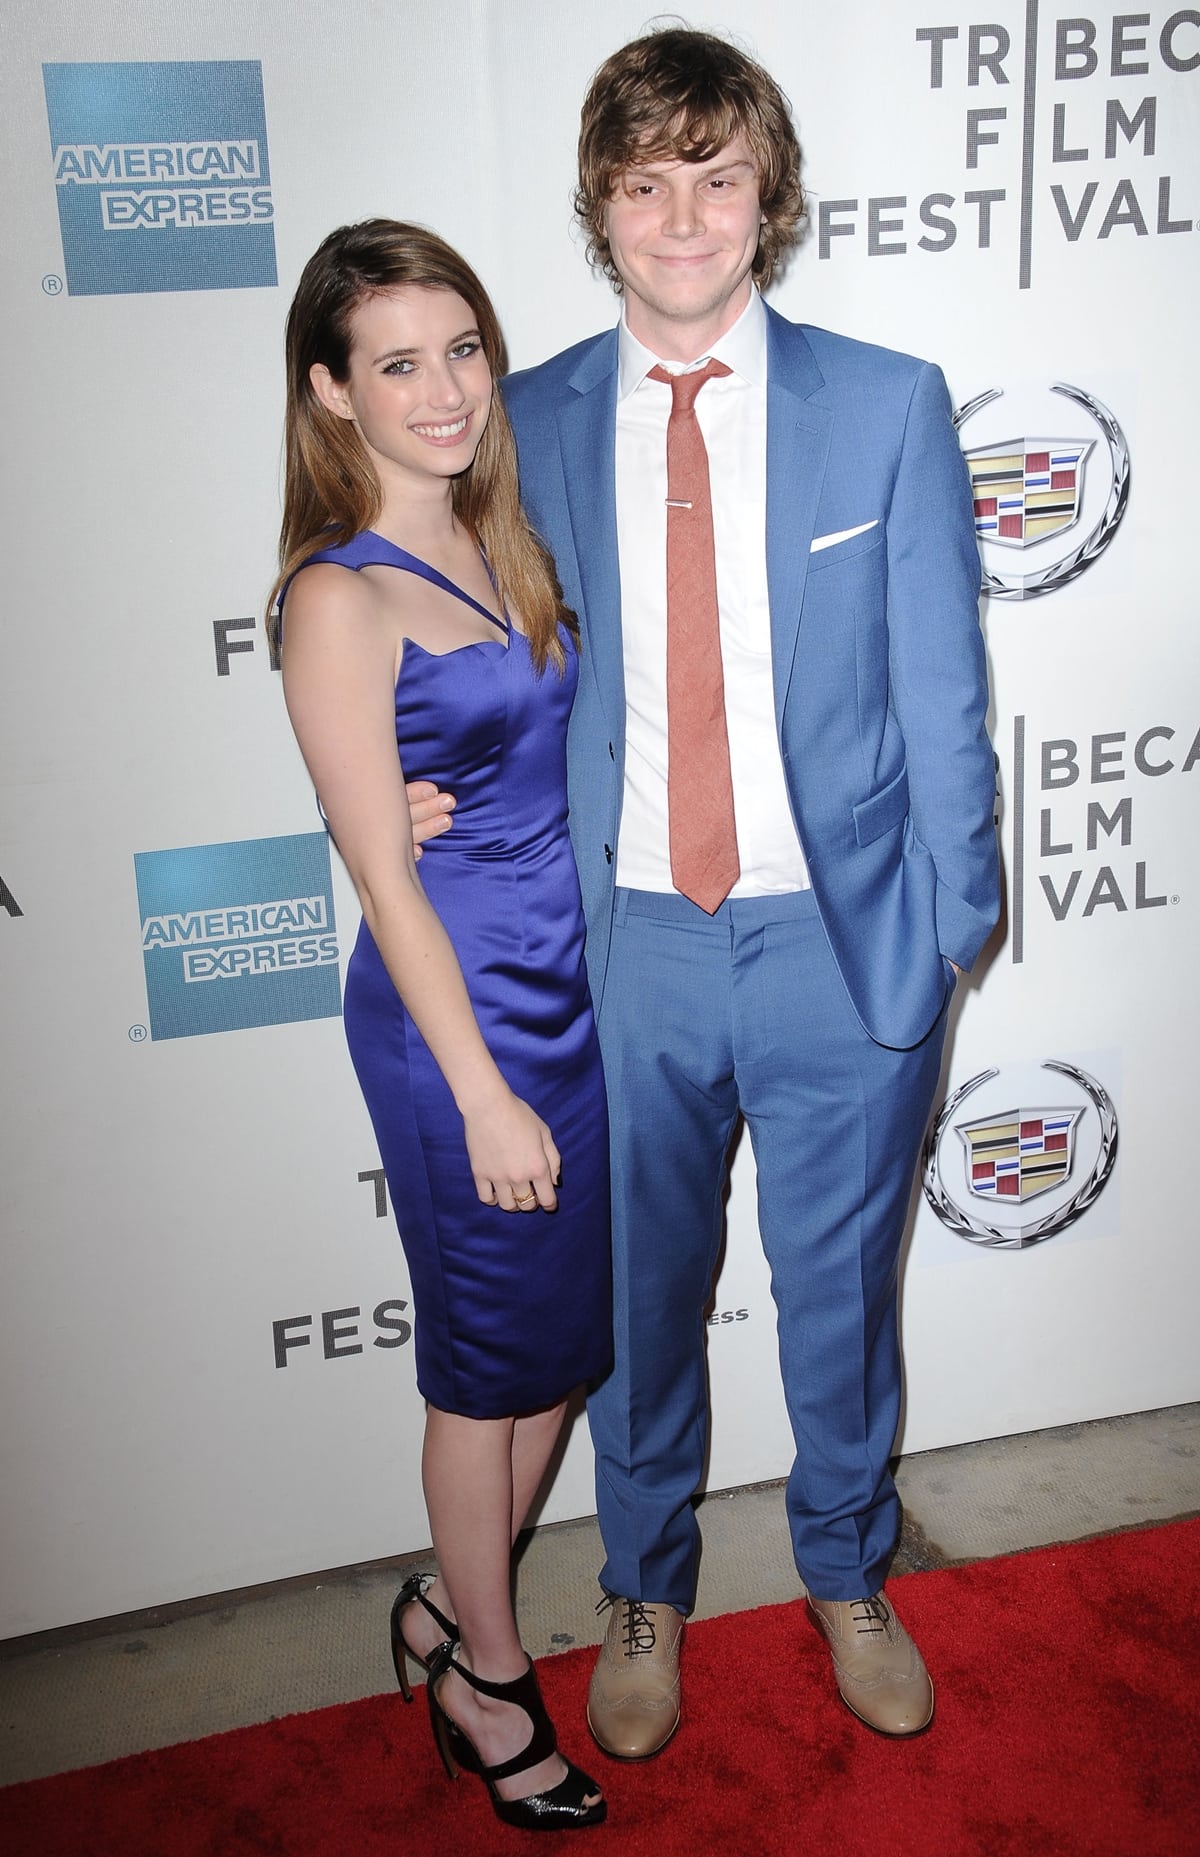 Actors Evan Peters and Emma Roberts attend the "Adult World" premiere after party during the 2013 Tribeca Film Festival